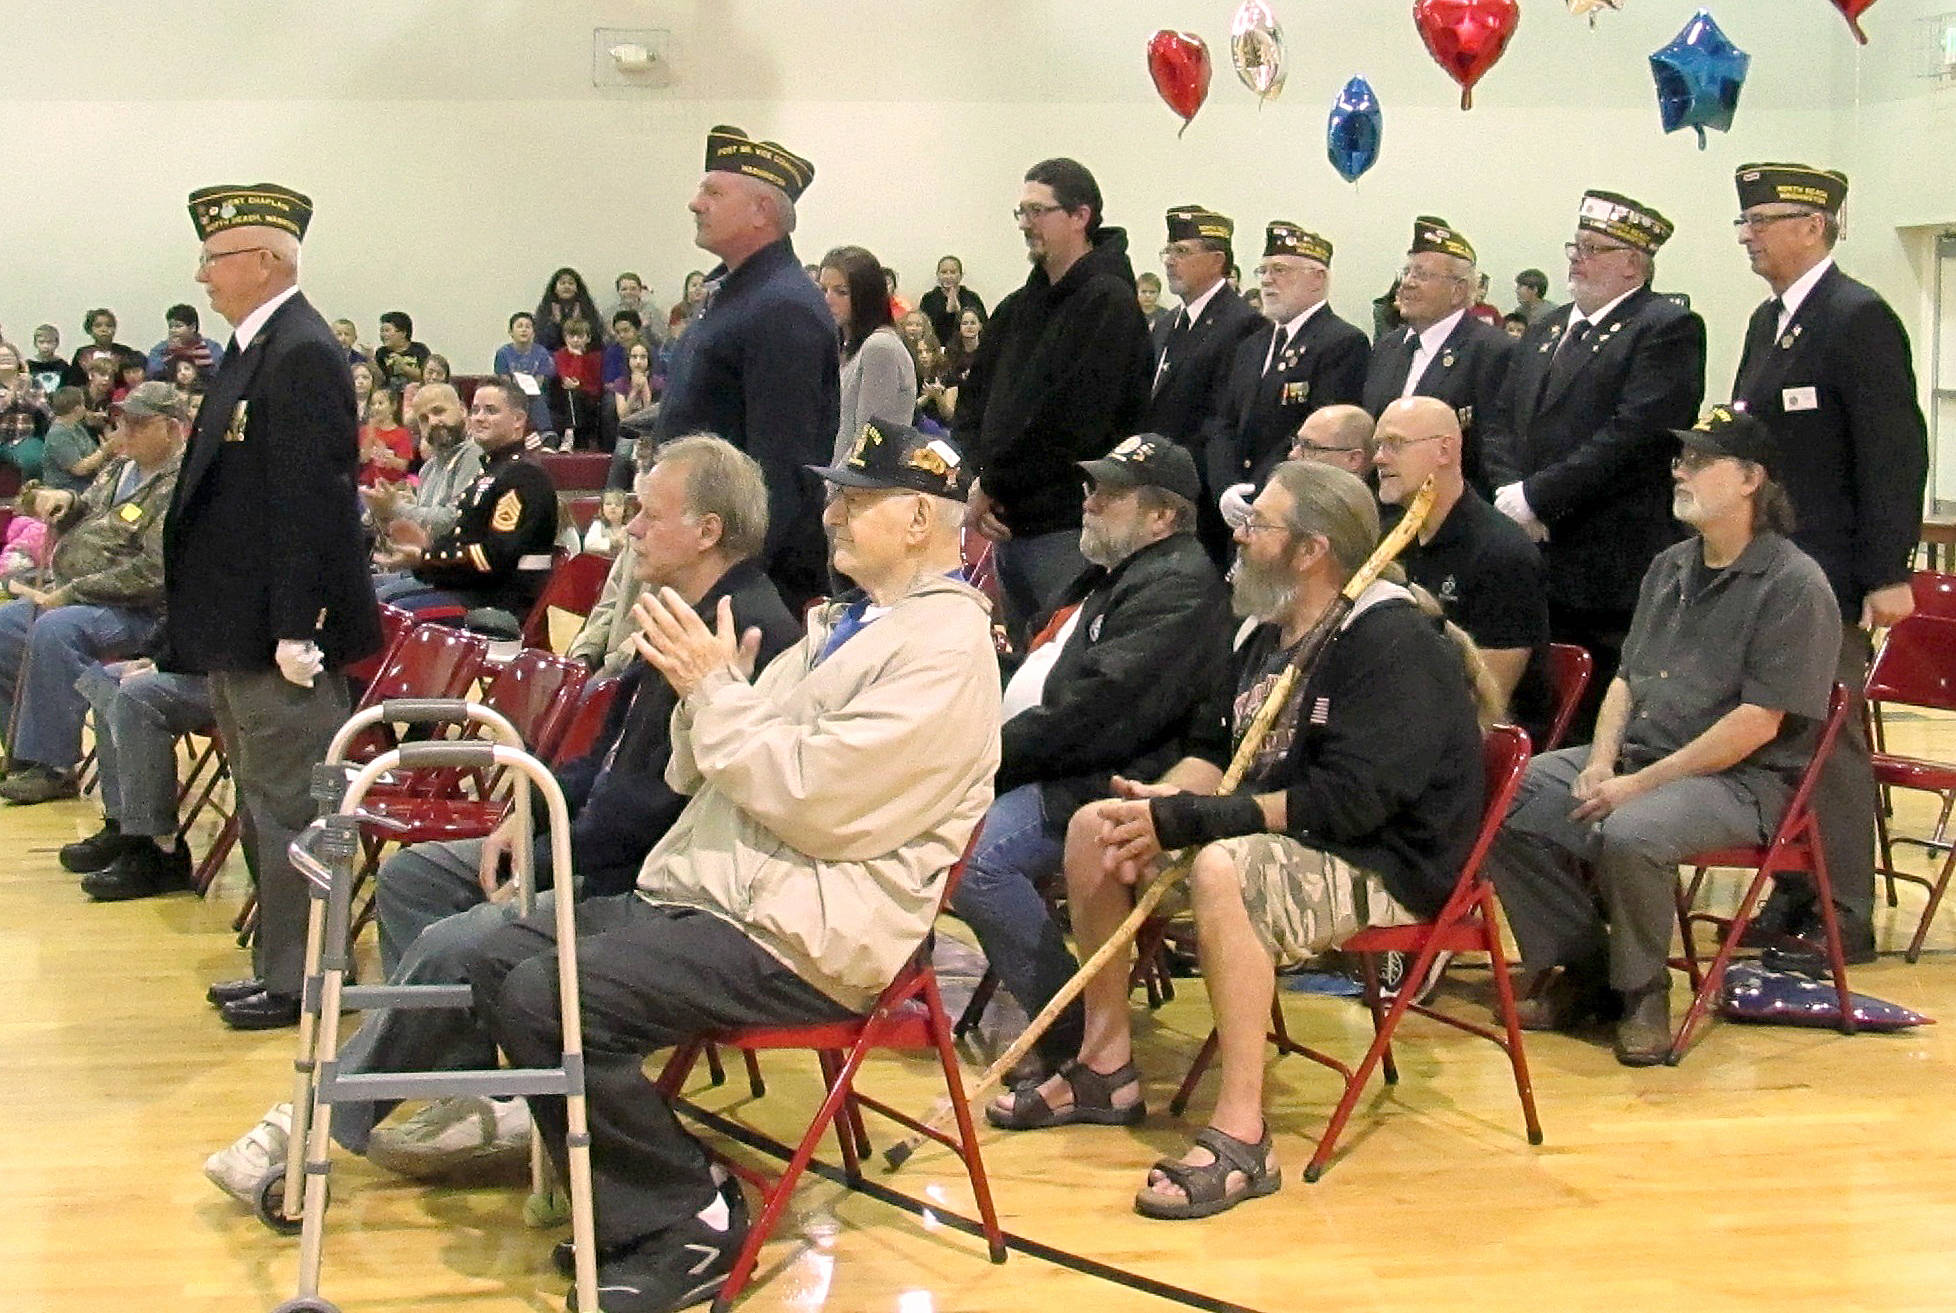 North Beach schools, students honor our Veterans